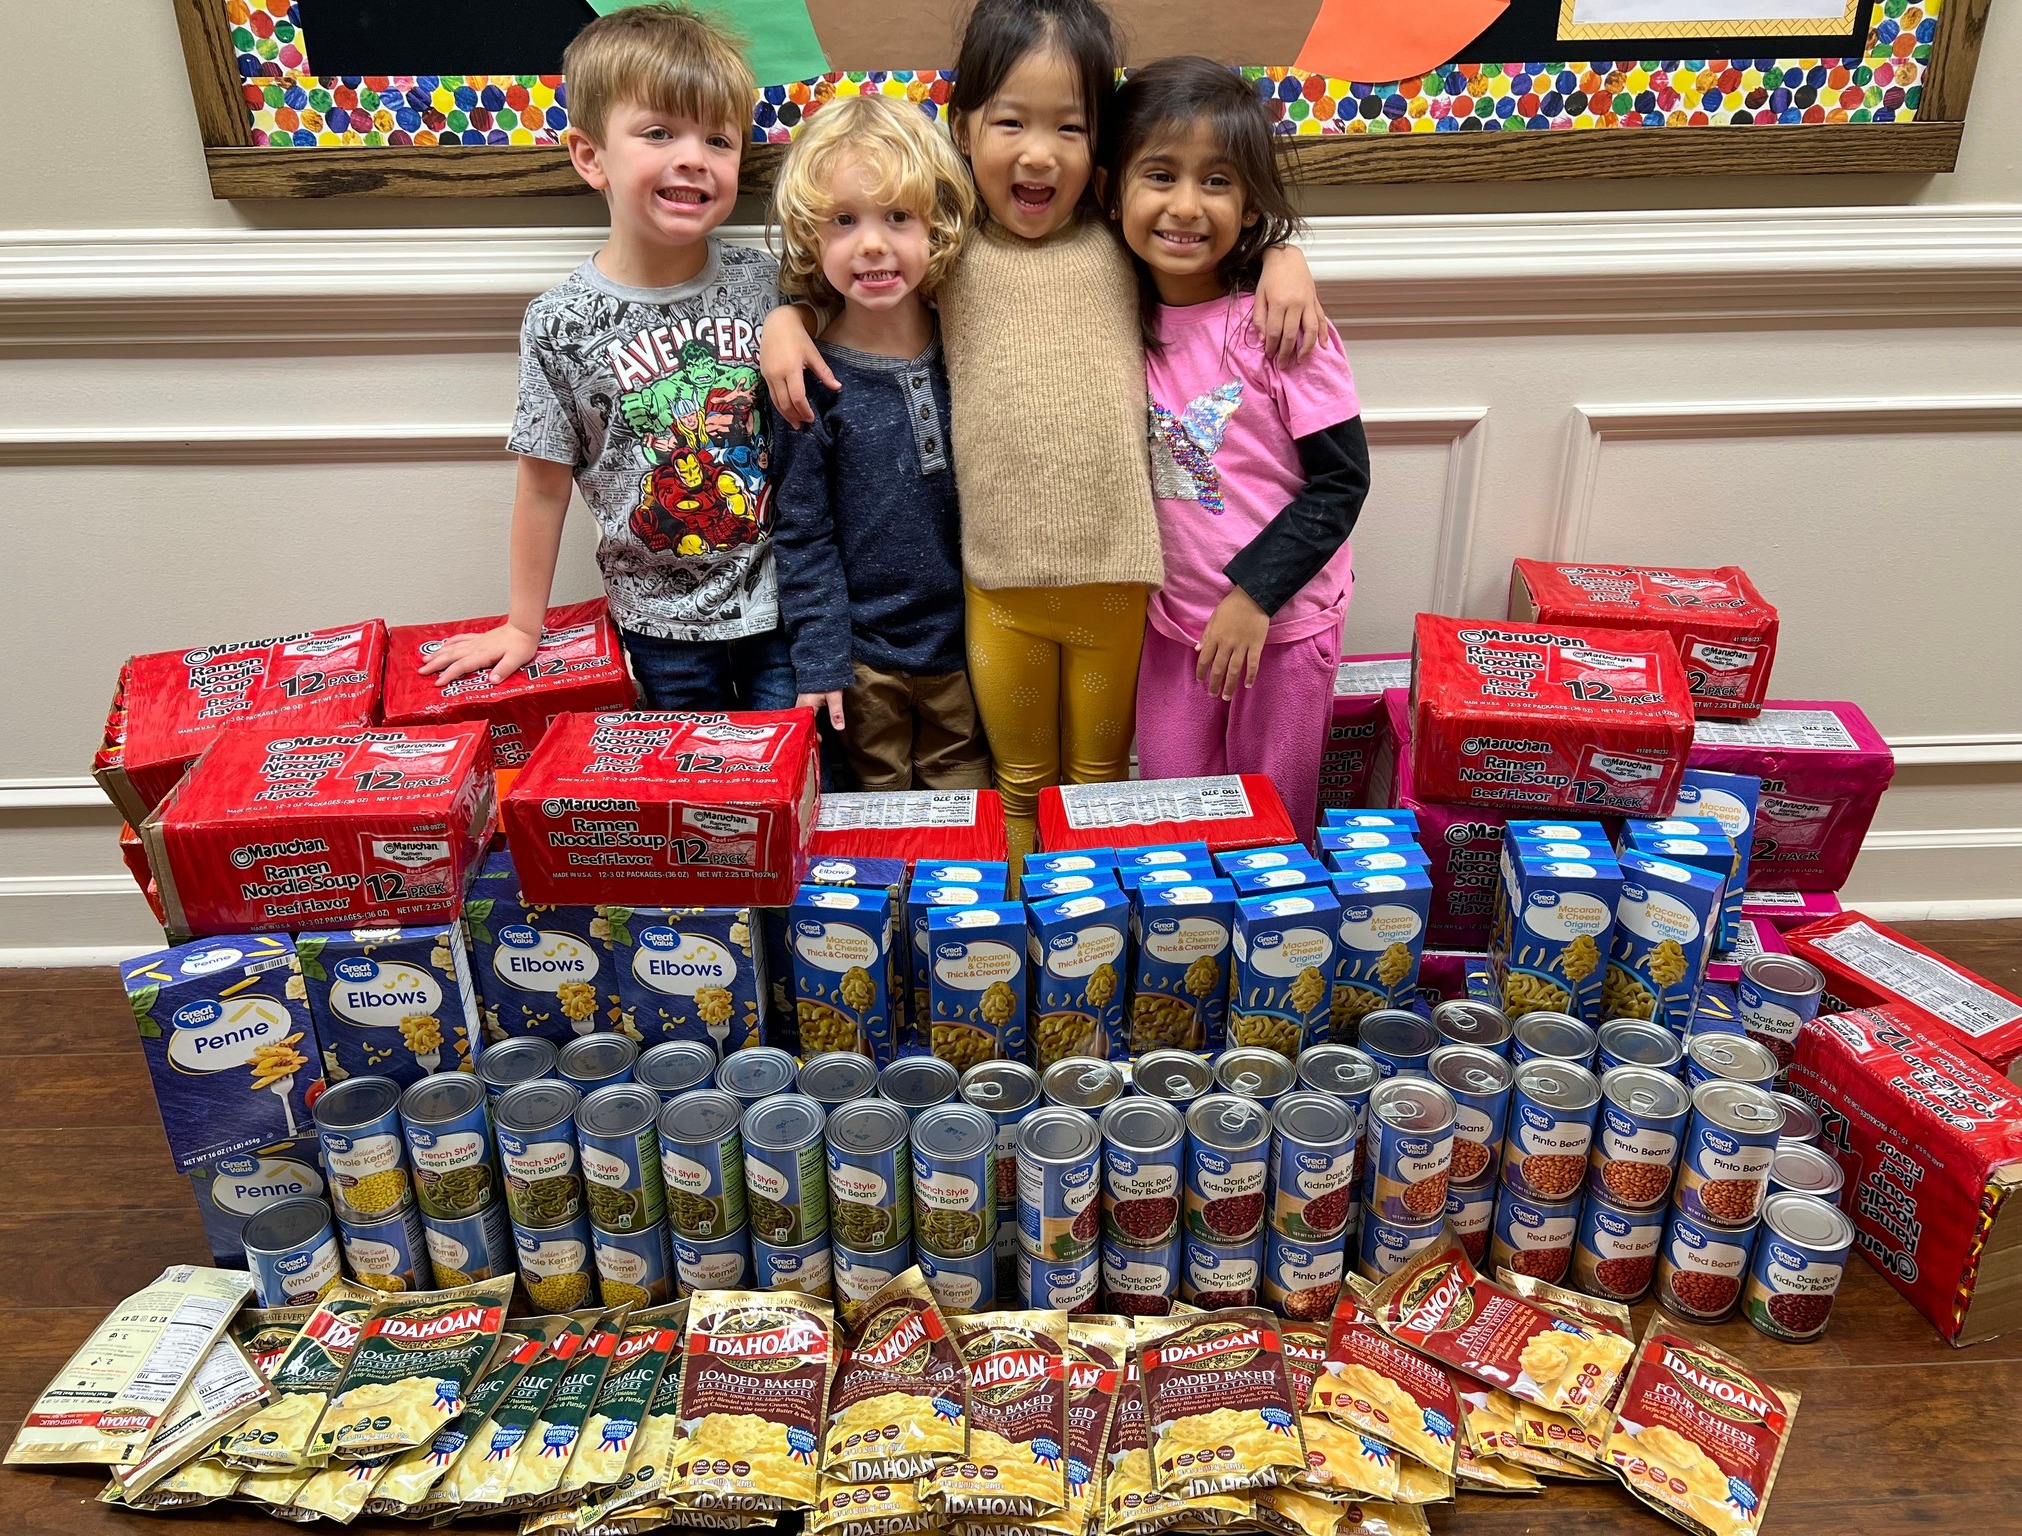 Students from Primrose School at Johns Creek (Suwanee, GA) sort items for the school's annual Caring and Giving Food Drive.